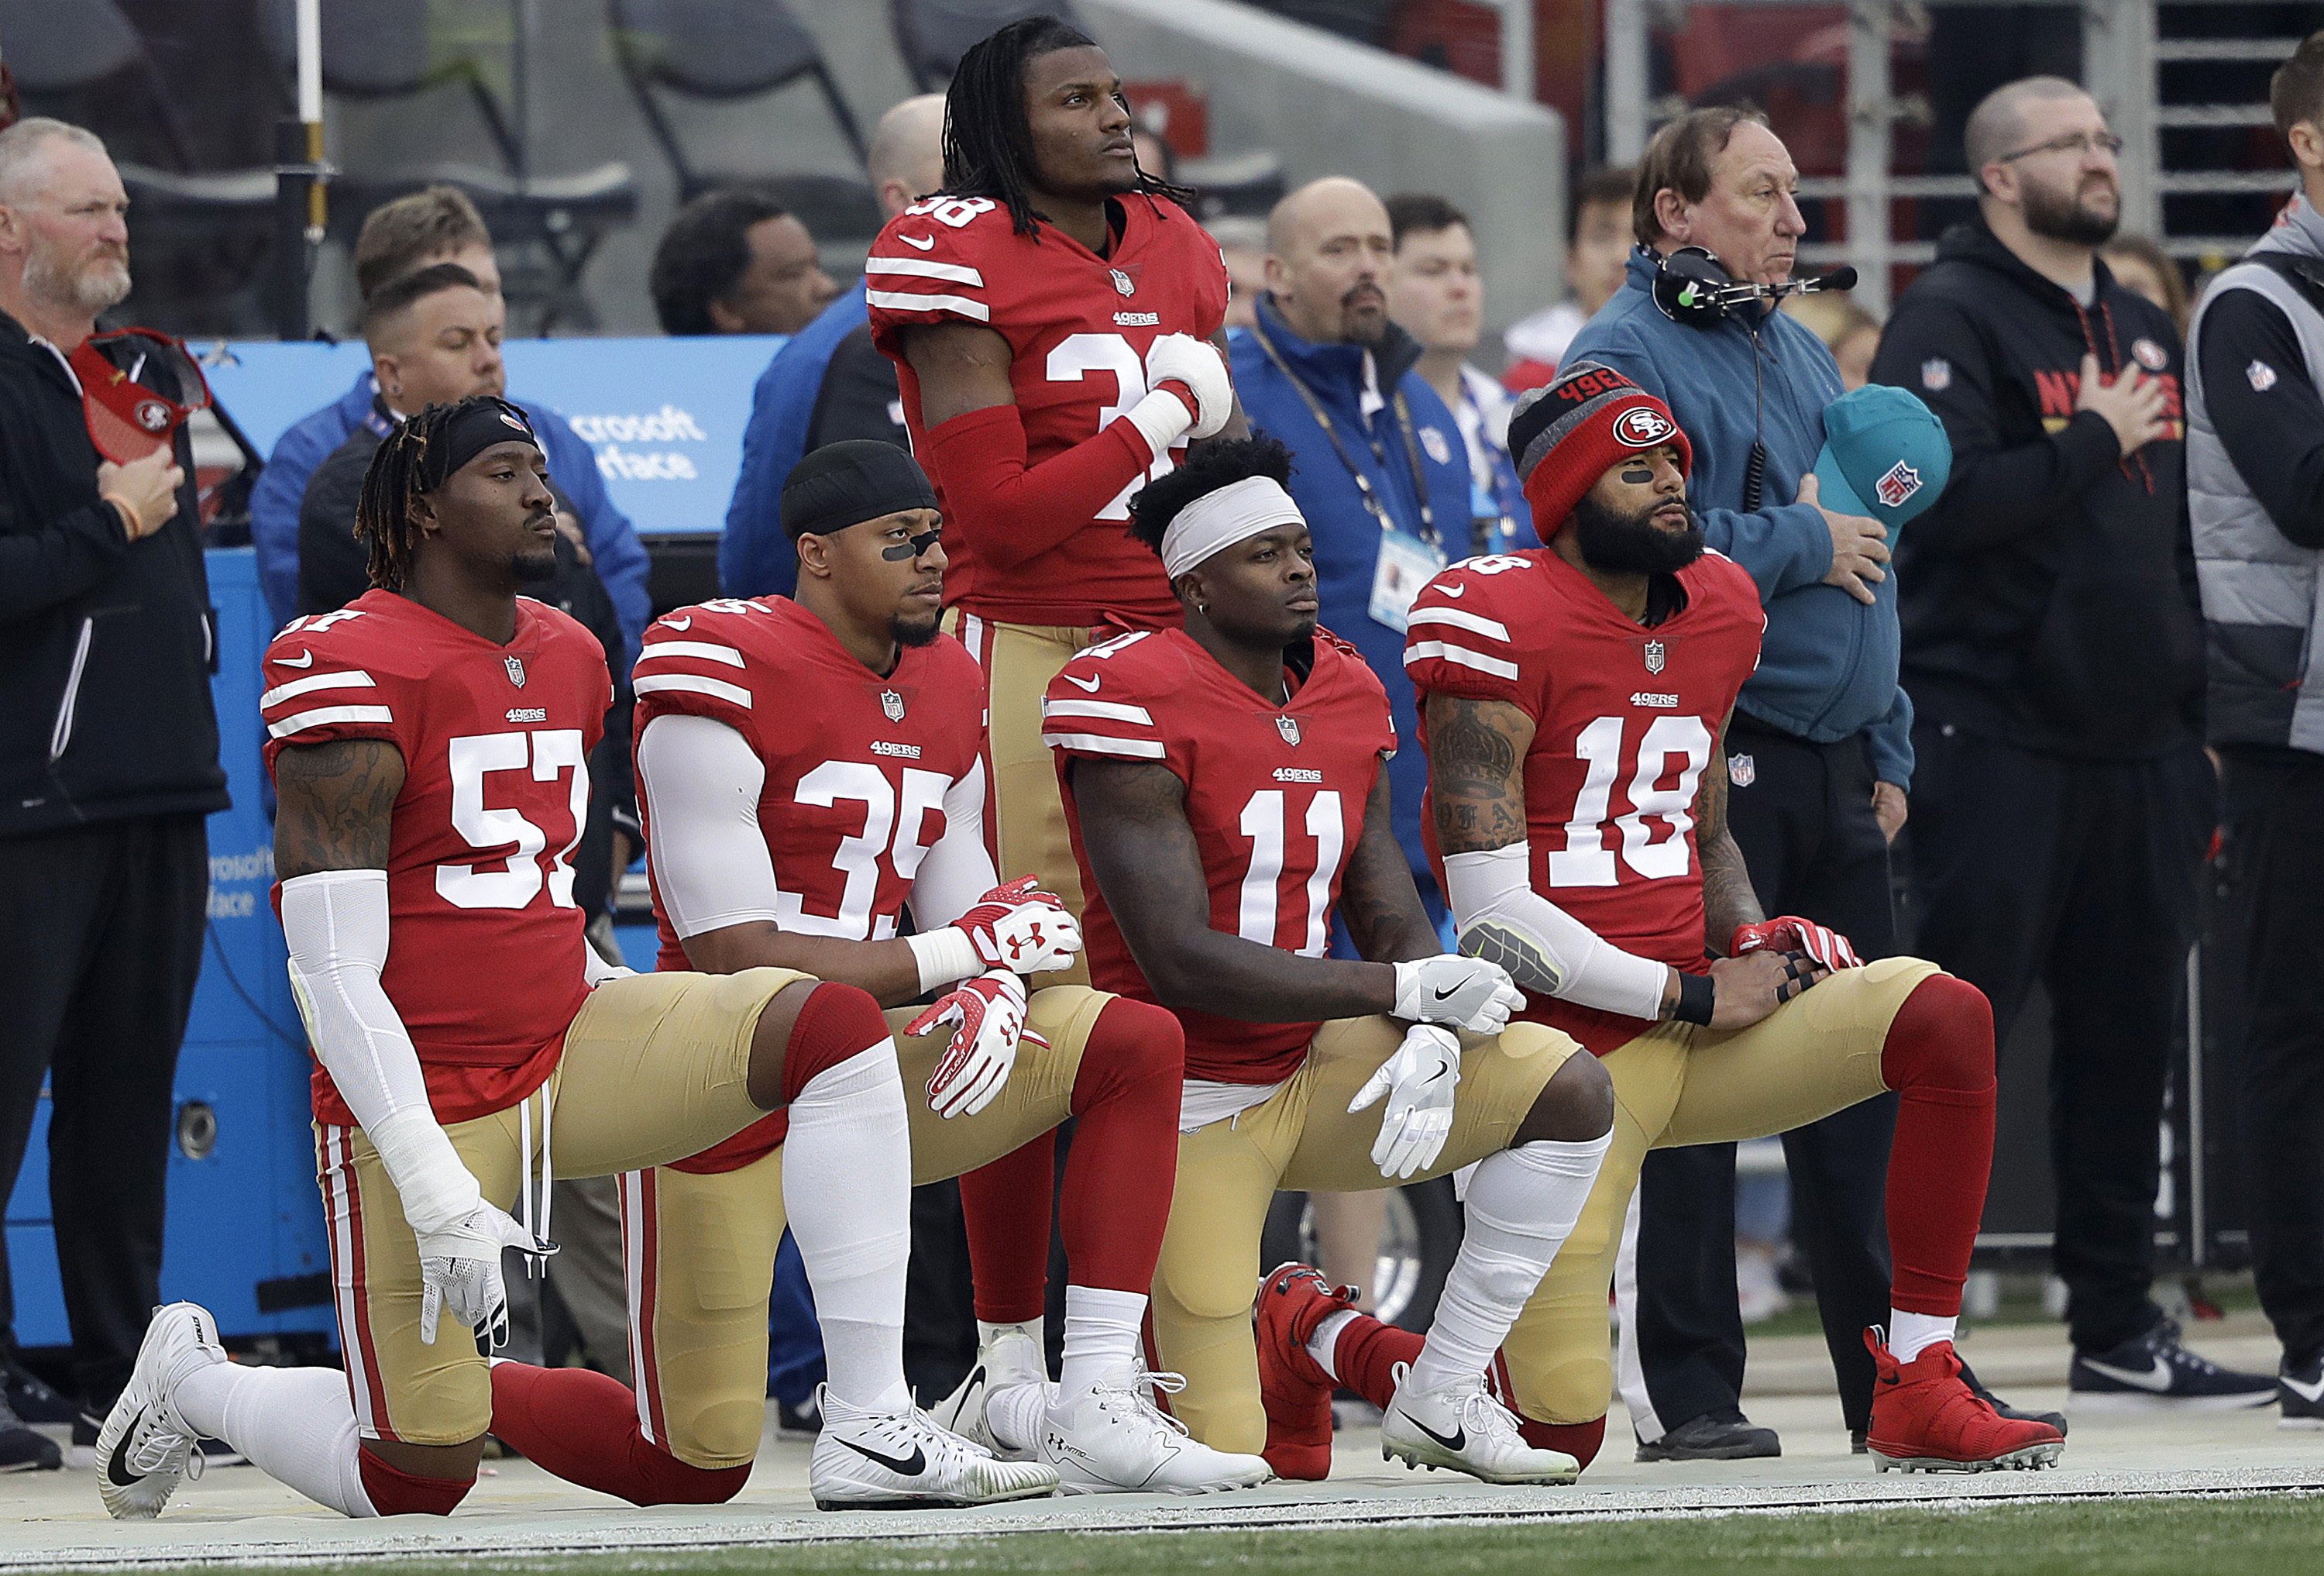 Nfl Players Union Files Grievance Over Anthem Policy